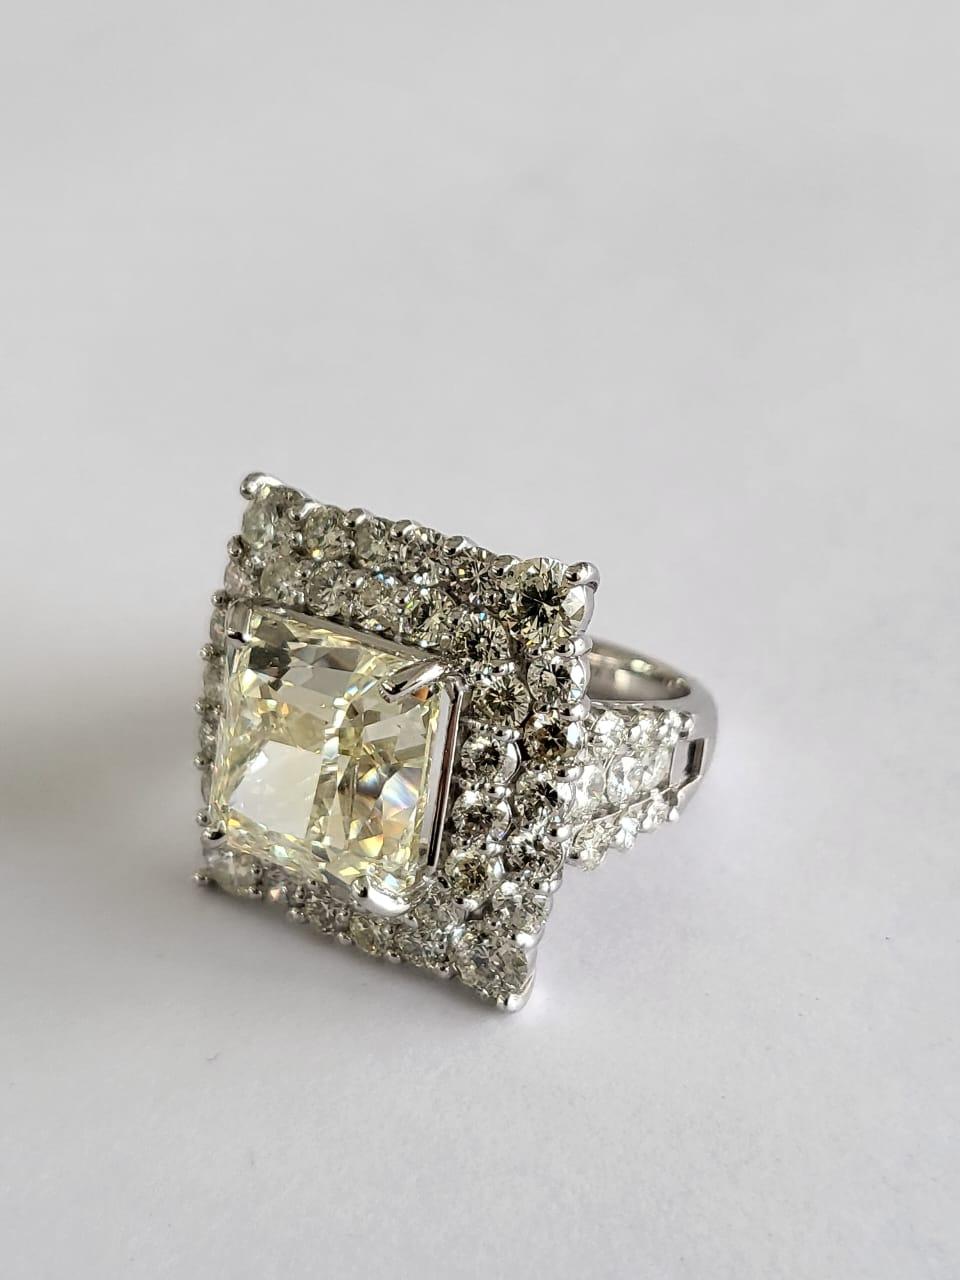 10.03 carats, Very Light Yellow, VS2 clarity, Princess Diamond Engagement Ring For Sale 2